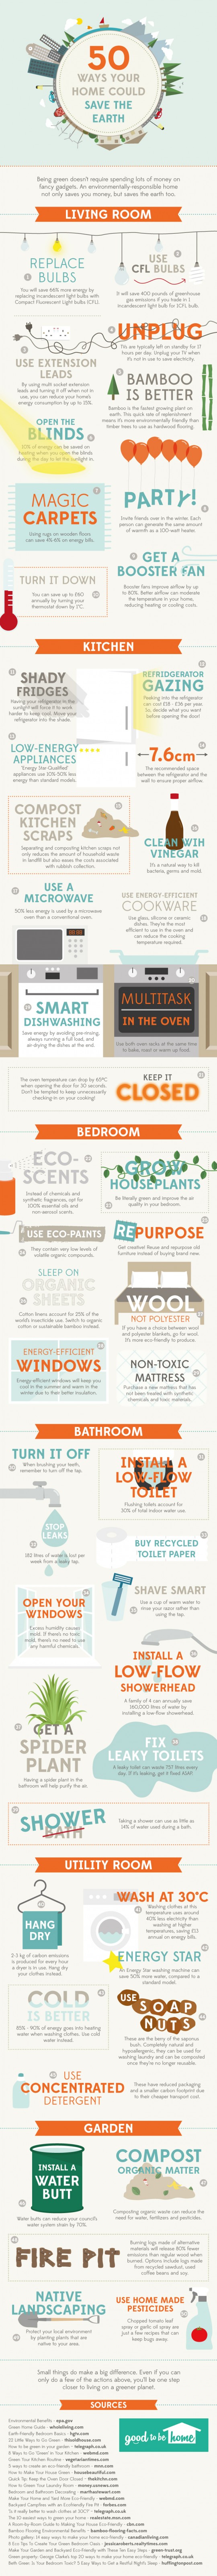 50 Ways Your Home Could Save The Planet